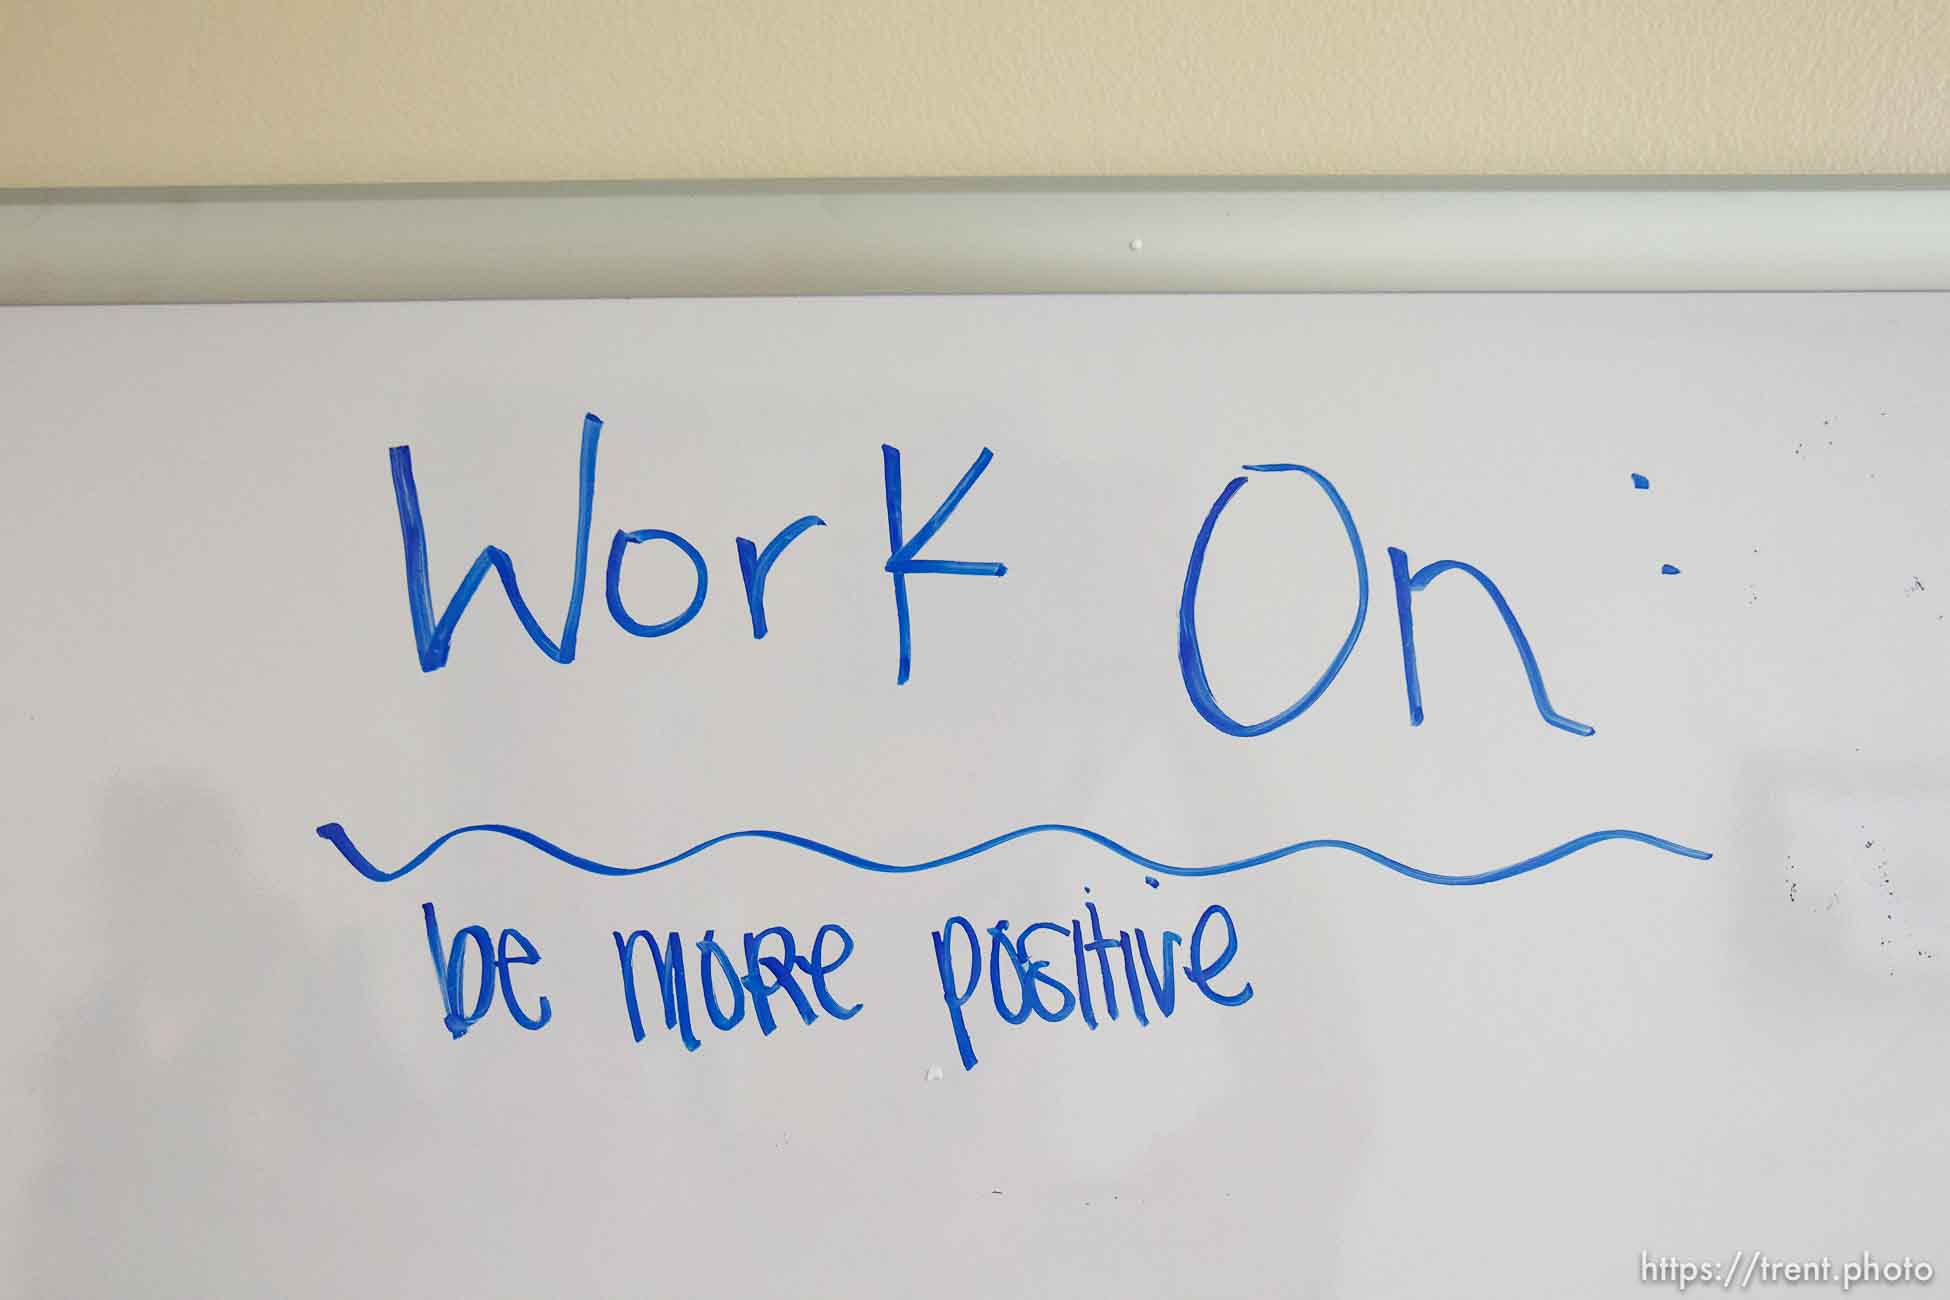 Work On: Be More Positive